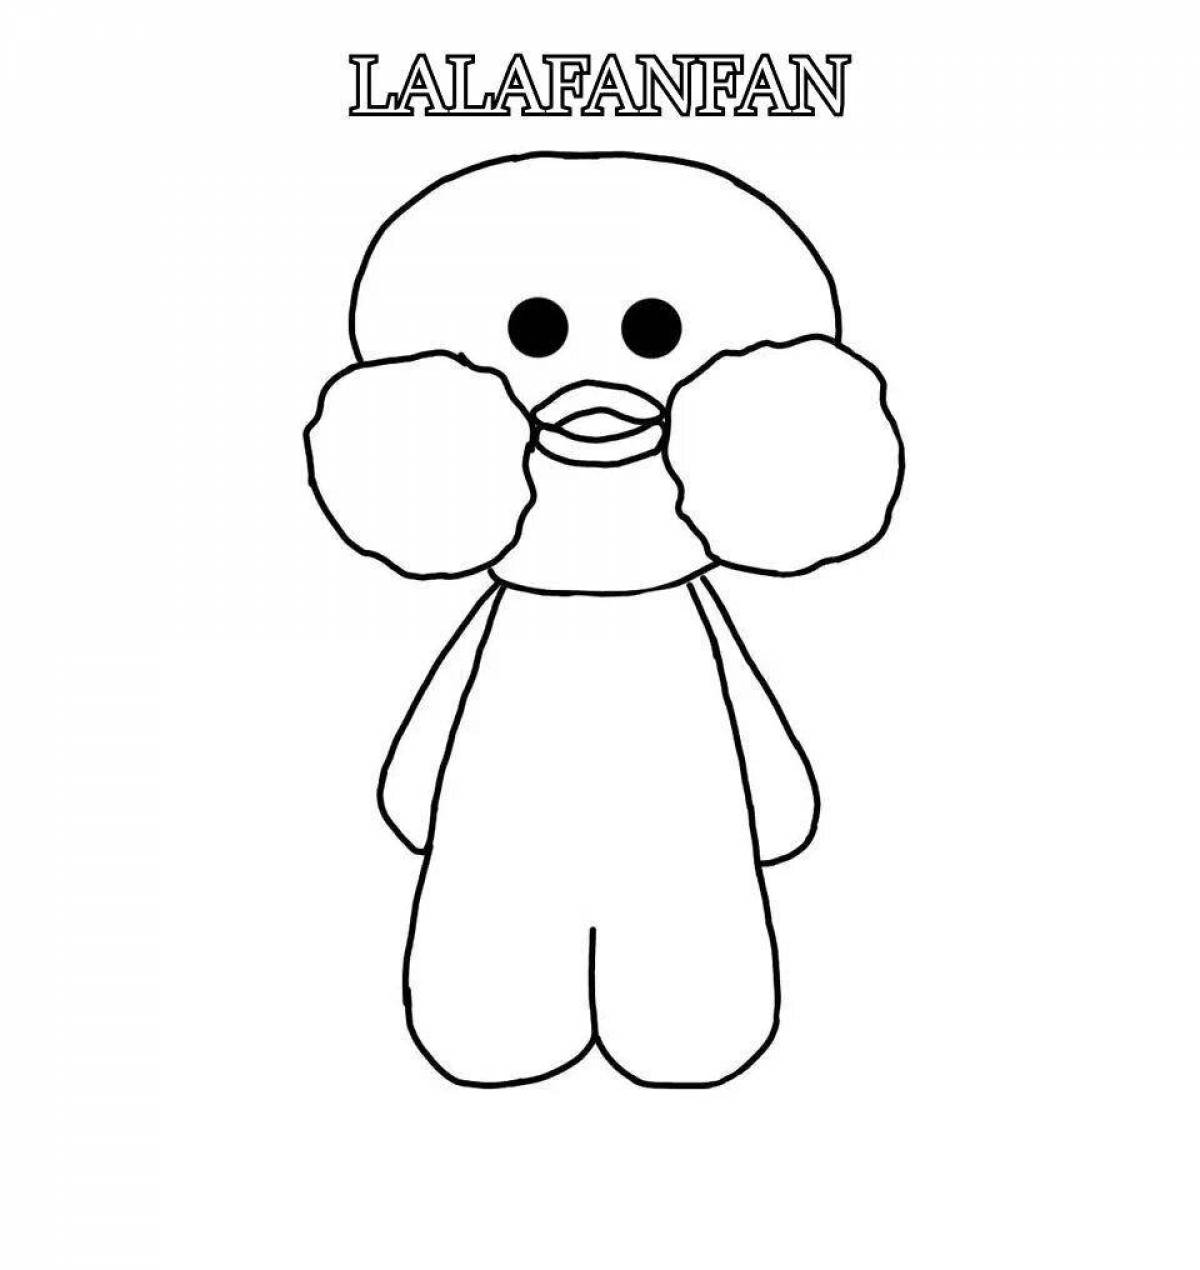 Coloring page charming lala fanfan